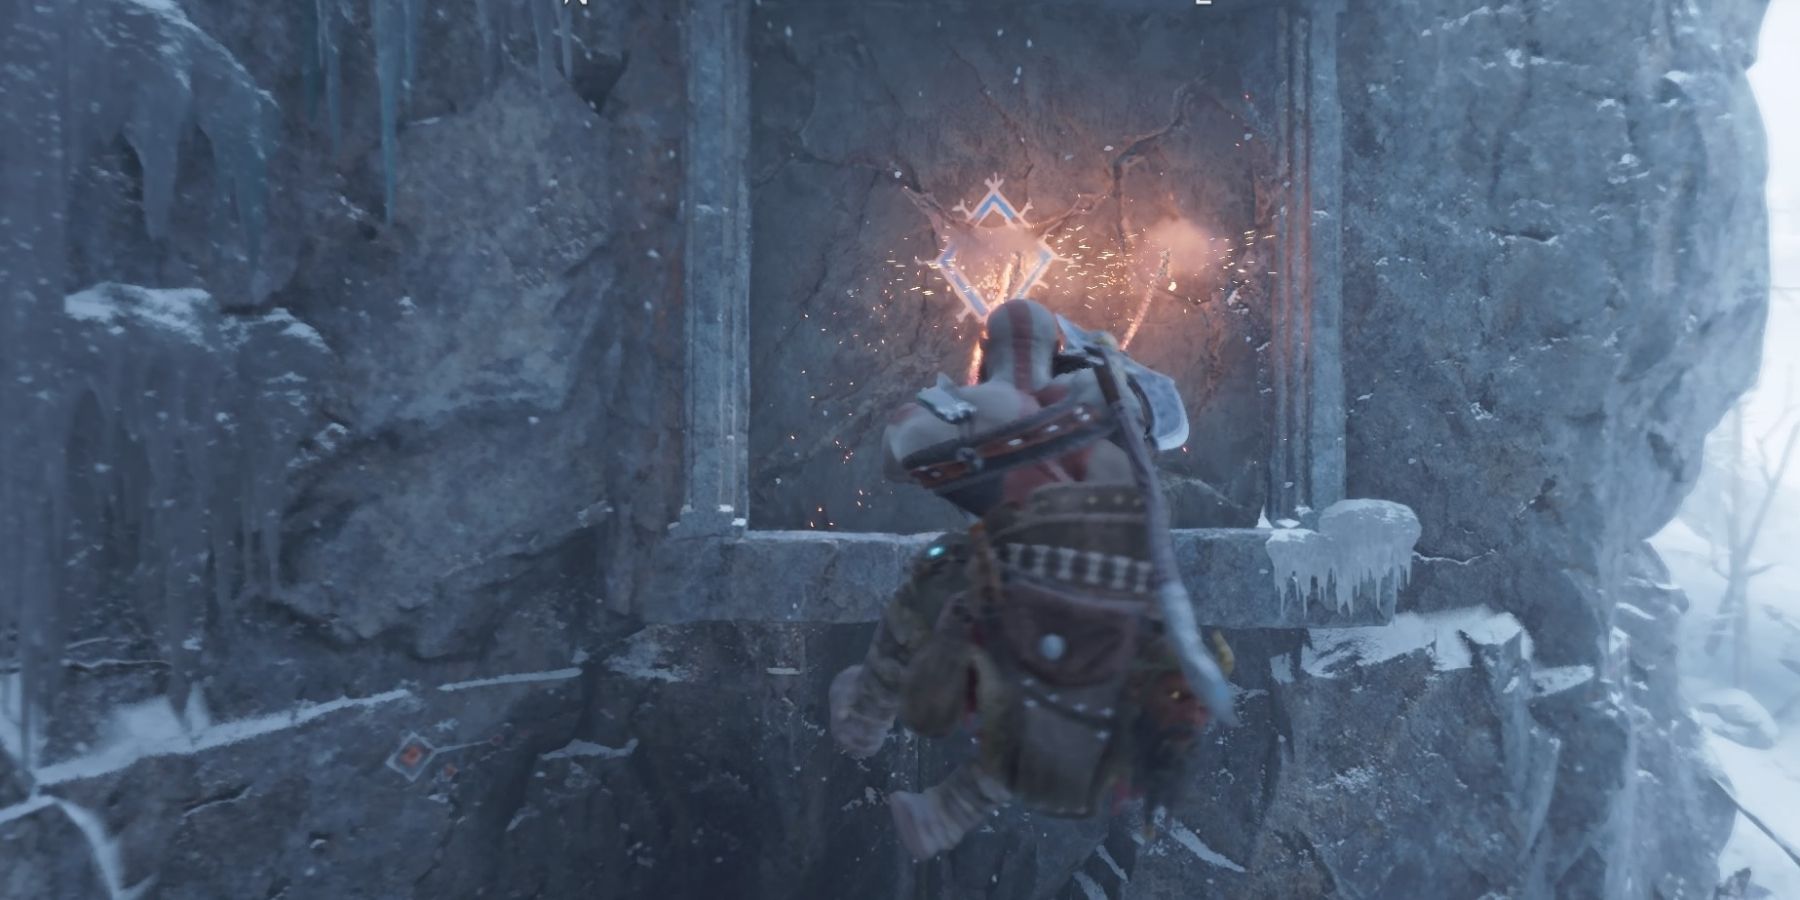 Kratos uses the Blades of Chaos to break through a wall in God of War Ragnarok